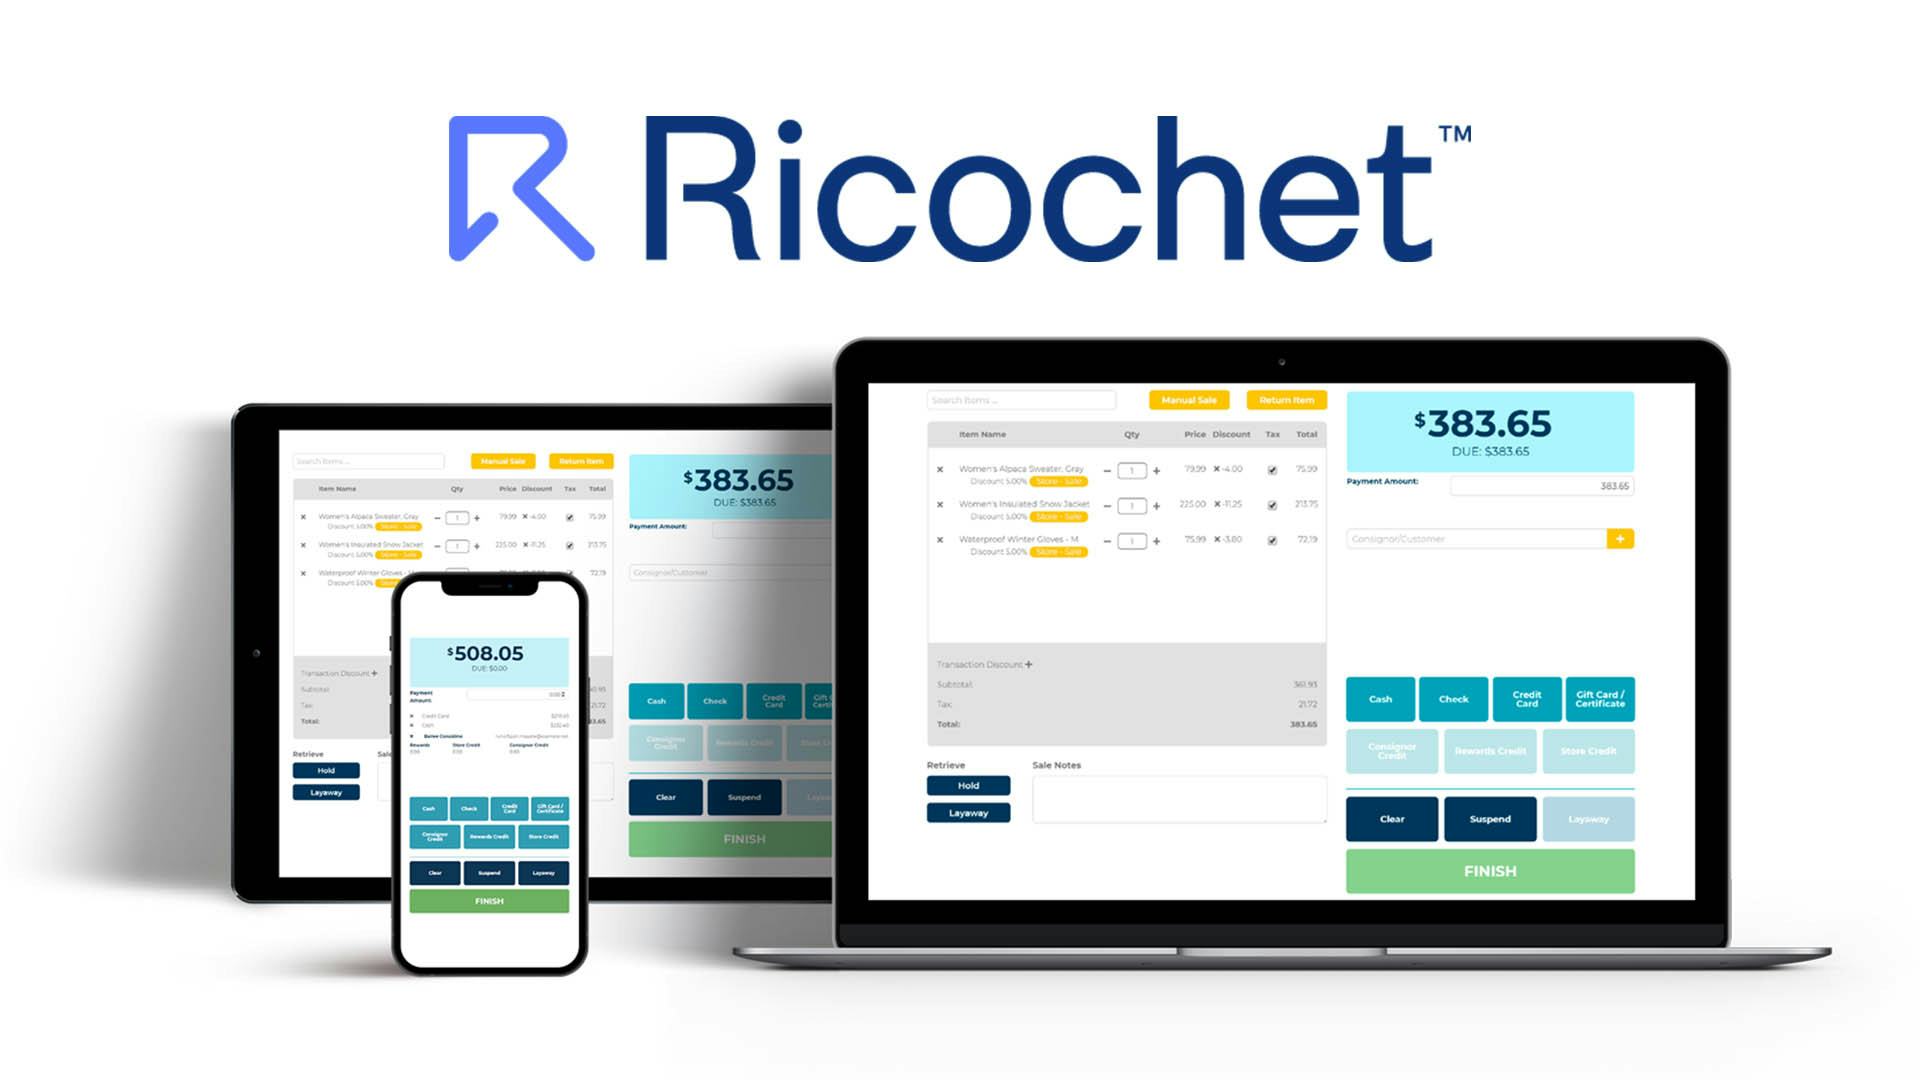 Ricochet Software - Ricochet POS - consignment and retail software